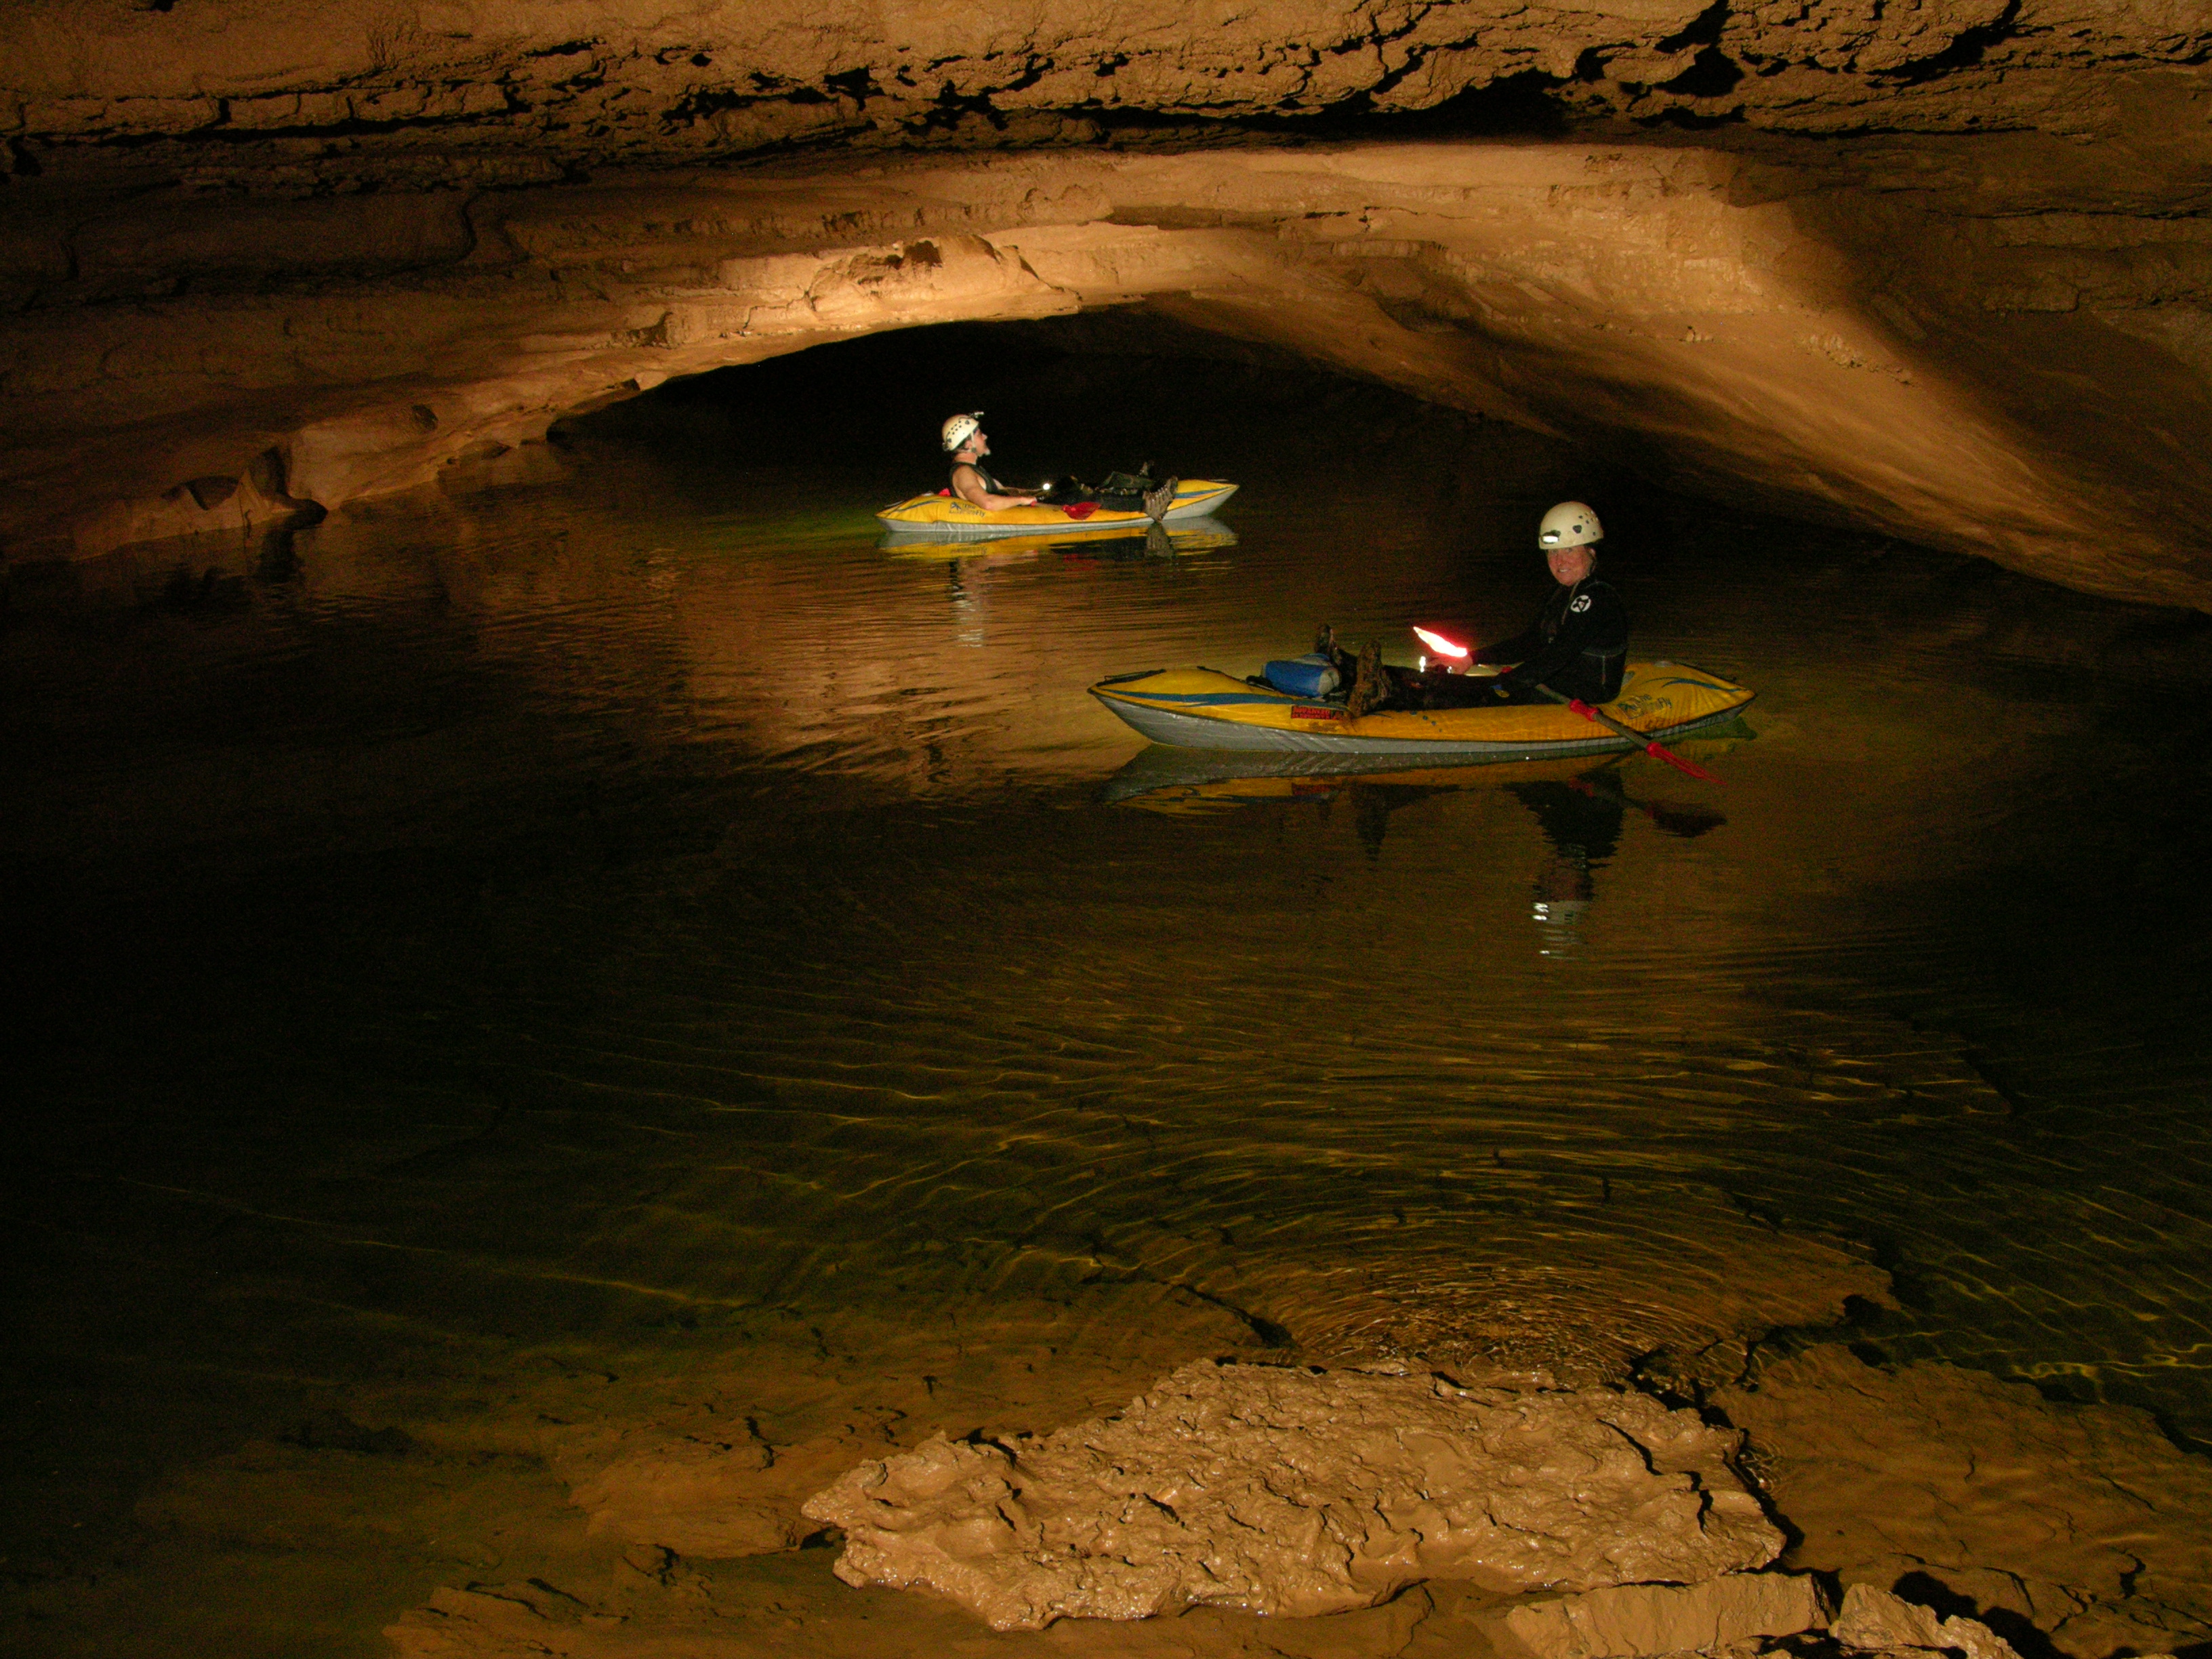 Two people wearing helmets sit in kayaks in a small body of water in a rocky cave passage.